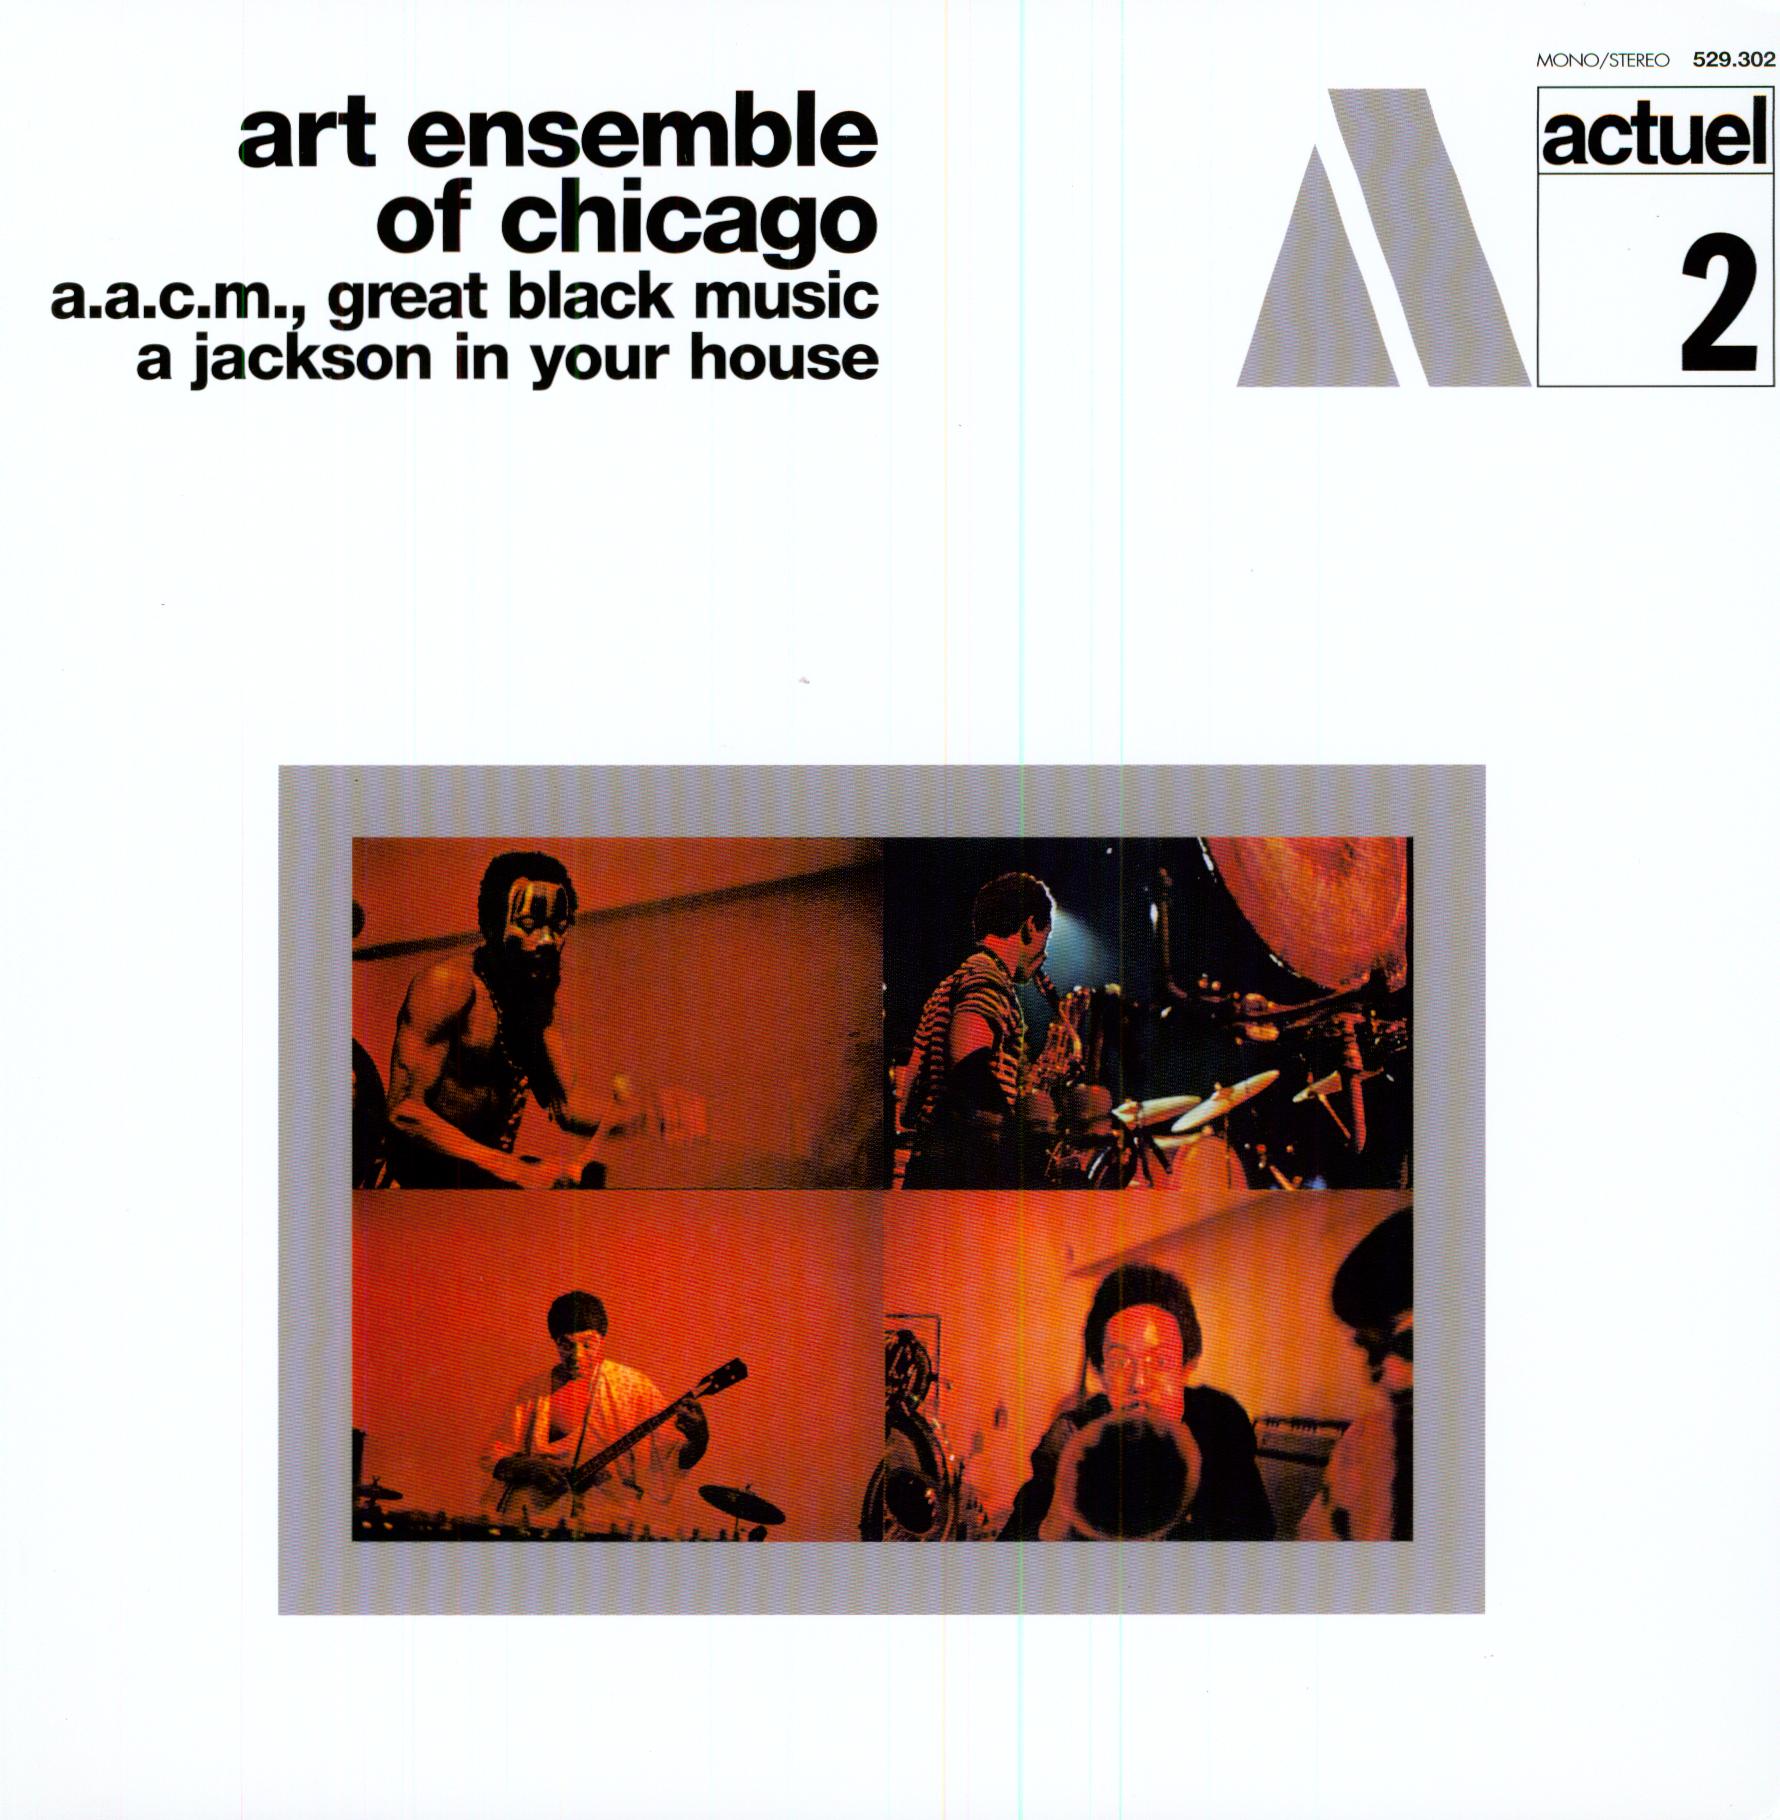 AACM GREAT BLACK MUSIC A JACKSON IN YOUR HOUSE